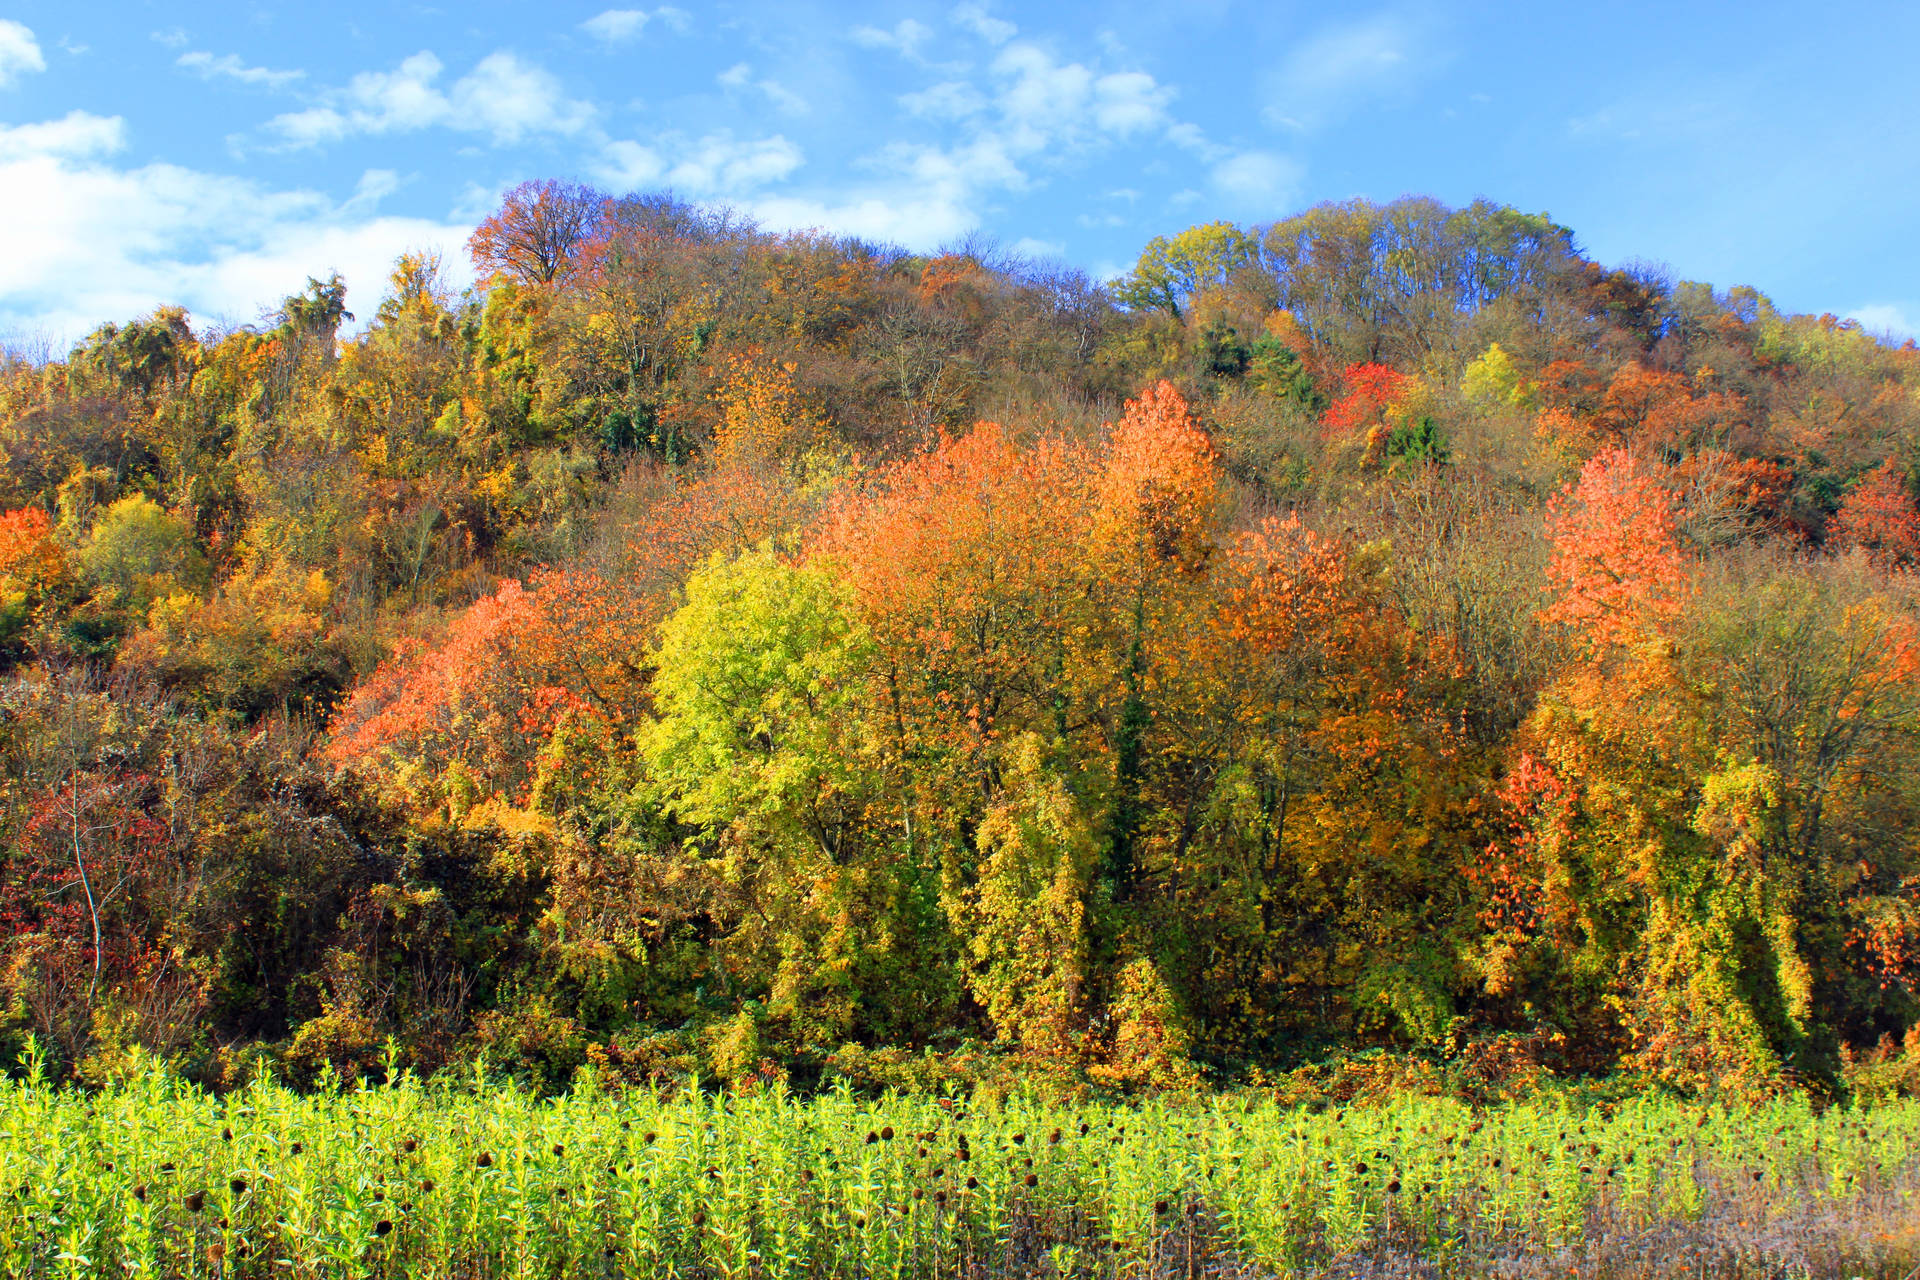 A forest full of trees with orange, green or red leaves during autumn season.